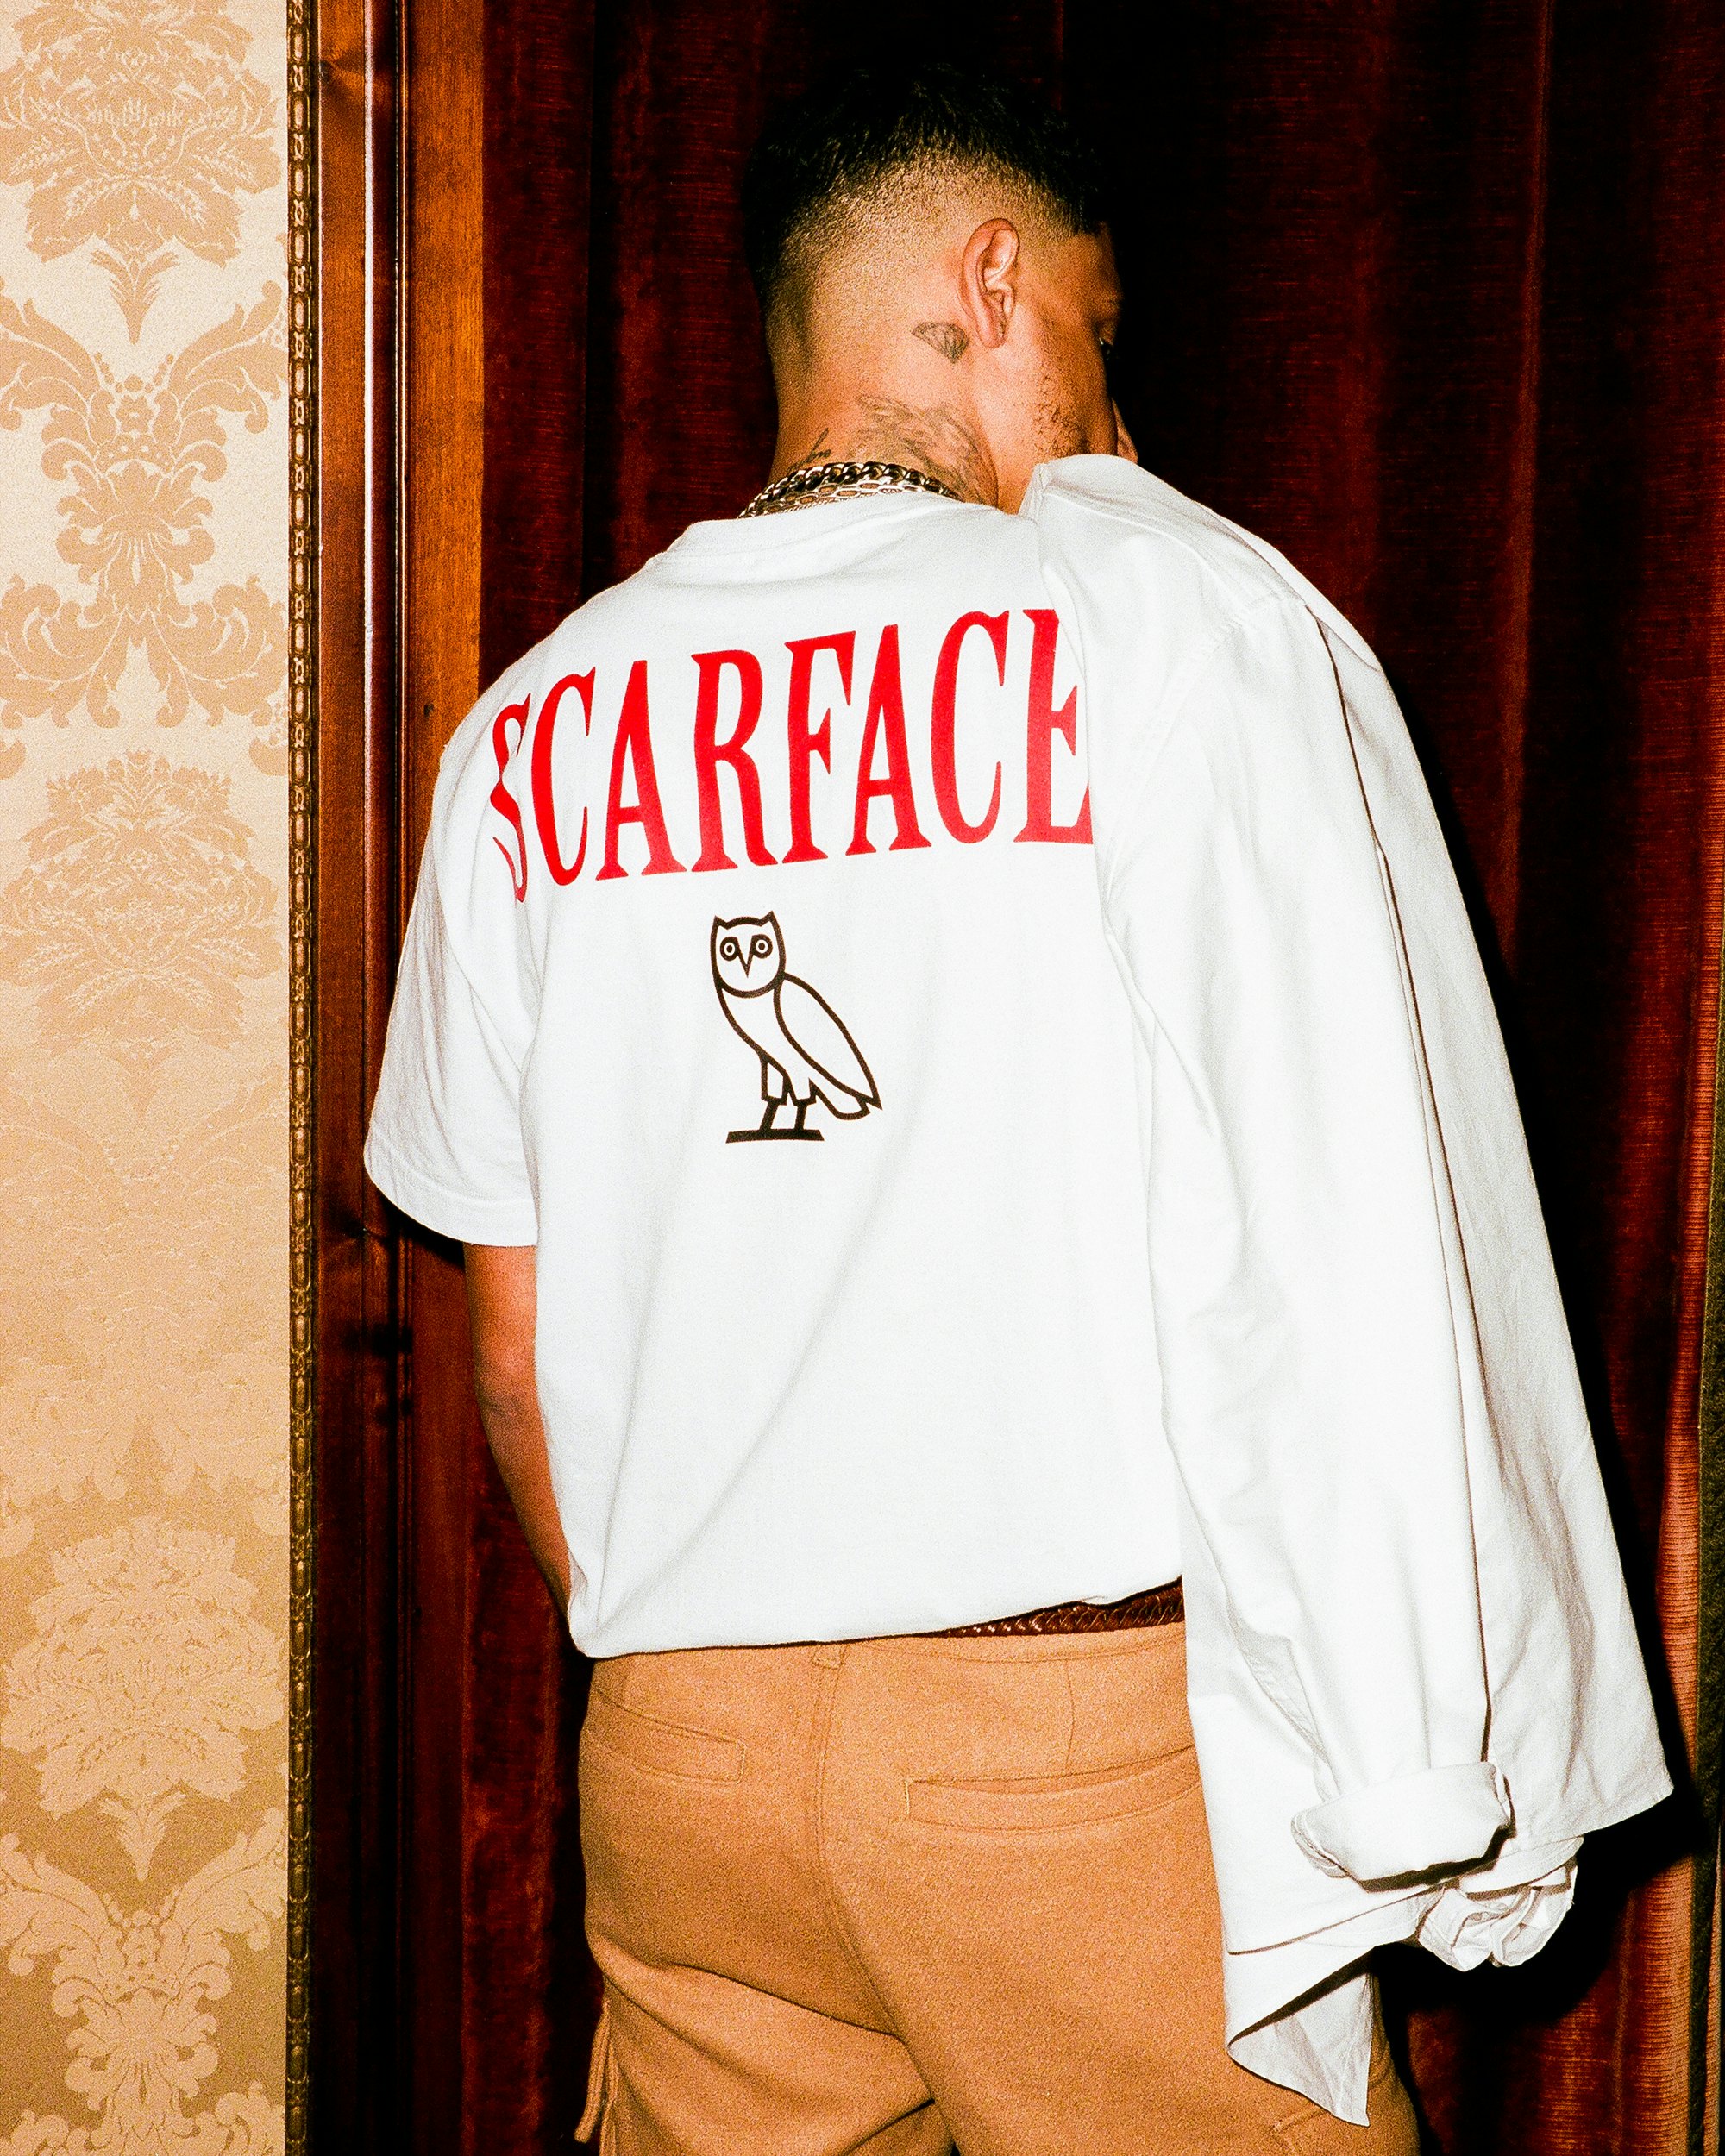 Drake's OVO brand taps 'Scarface' for its most gangster collection yet